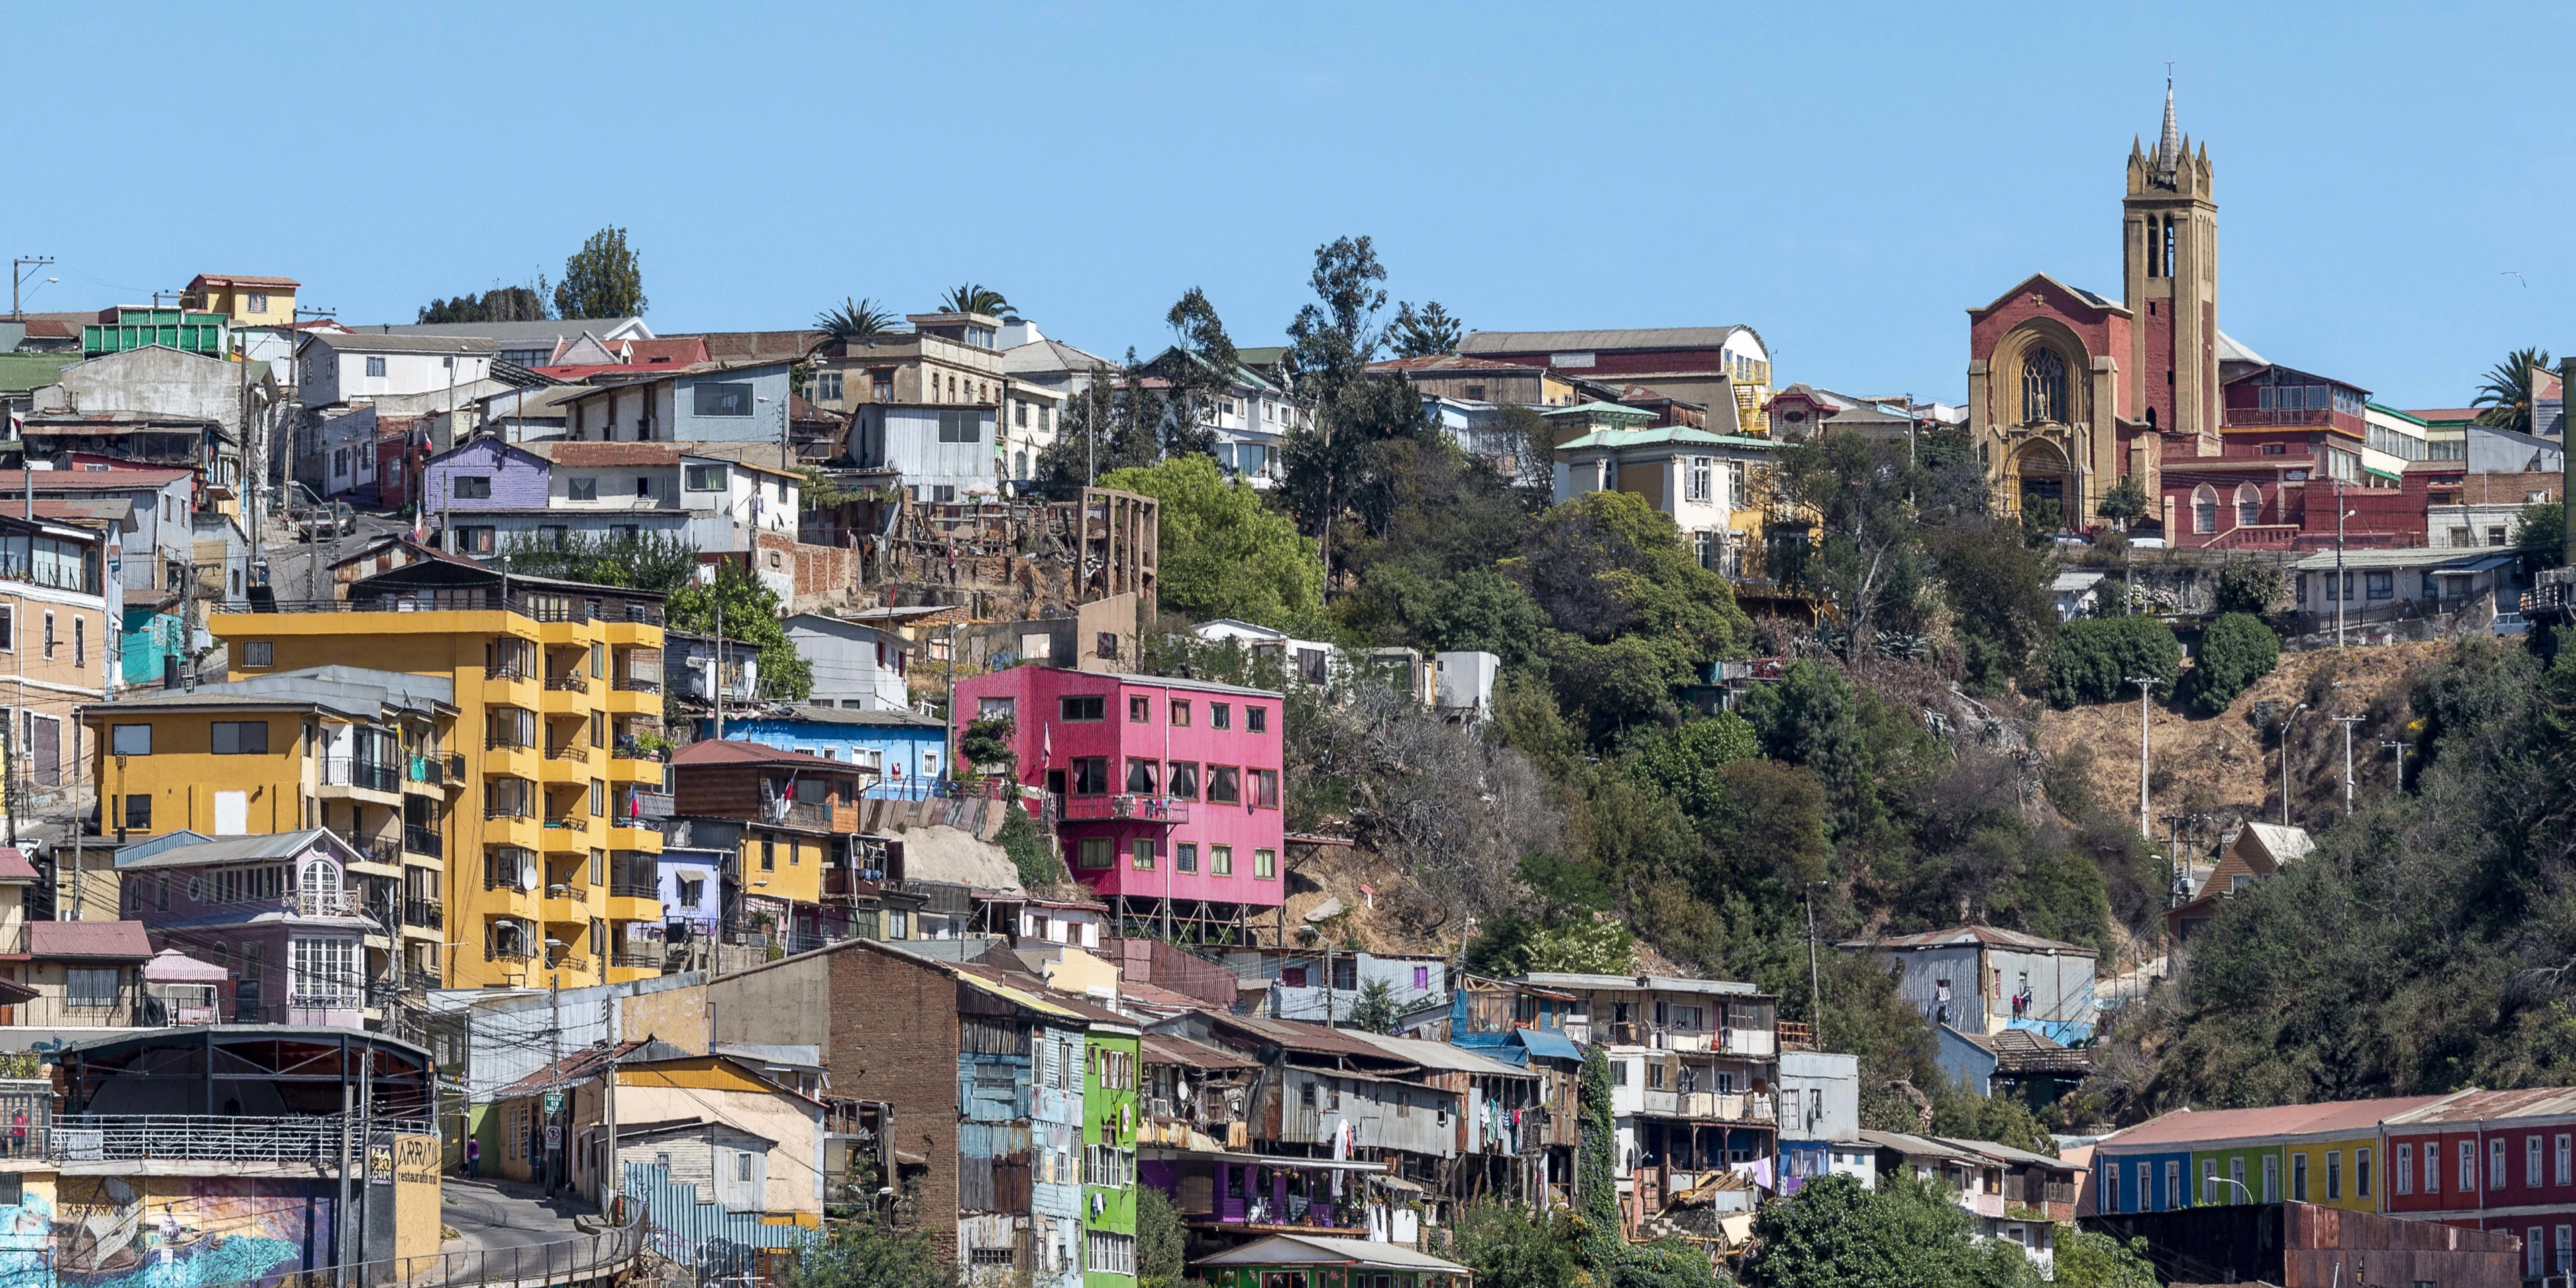 Get to know the colourful neighbourhoods of Valparaíso.